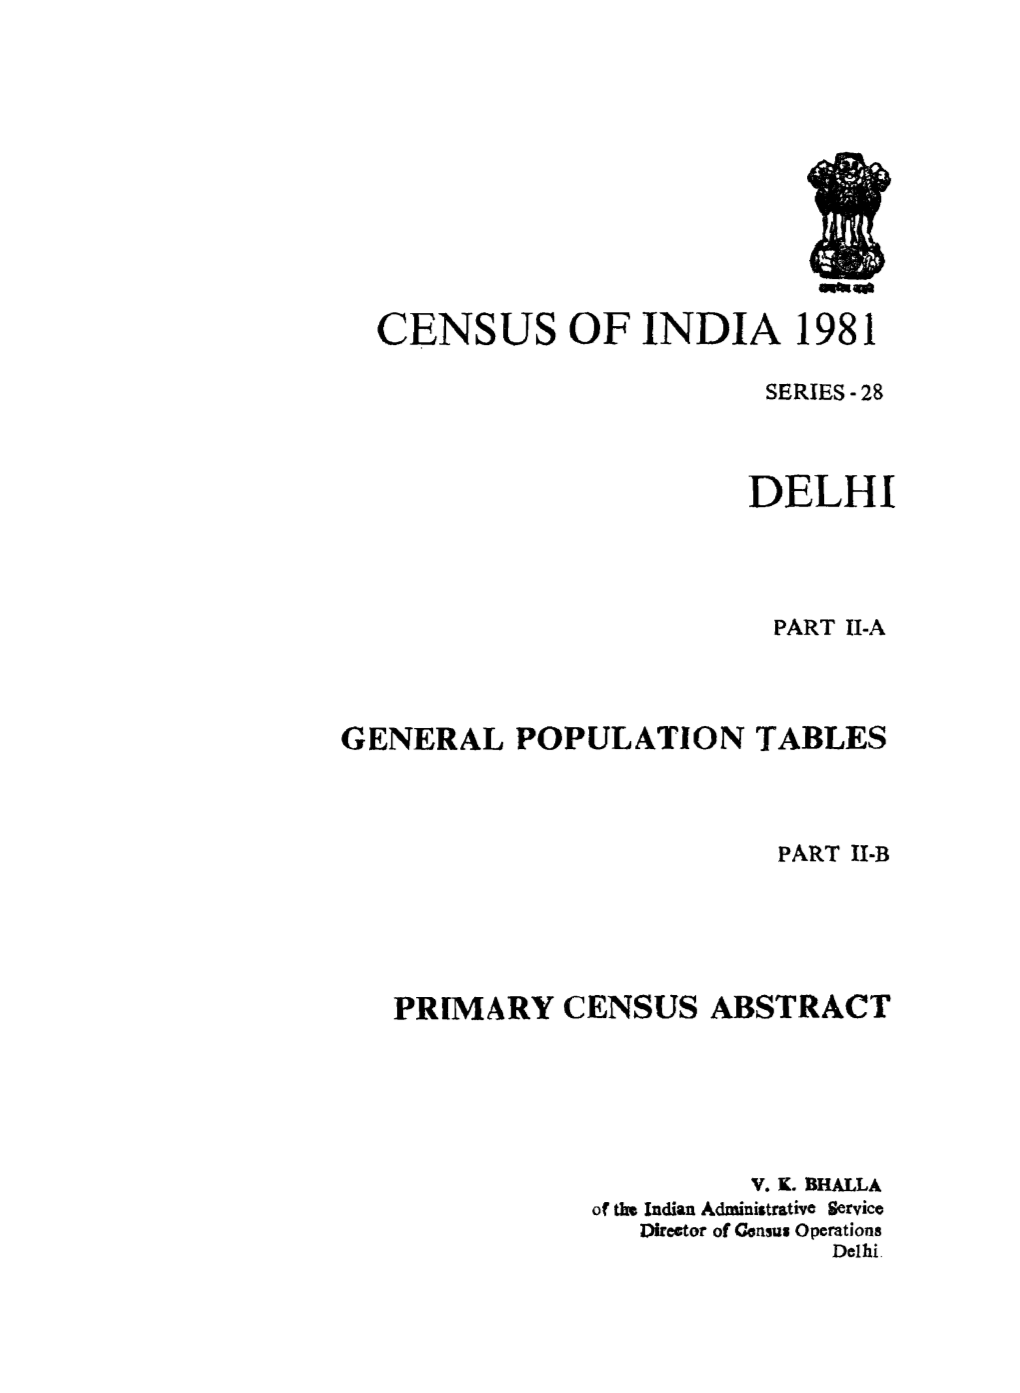 General Population Tables & Primary Census